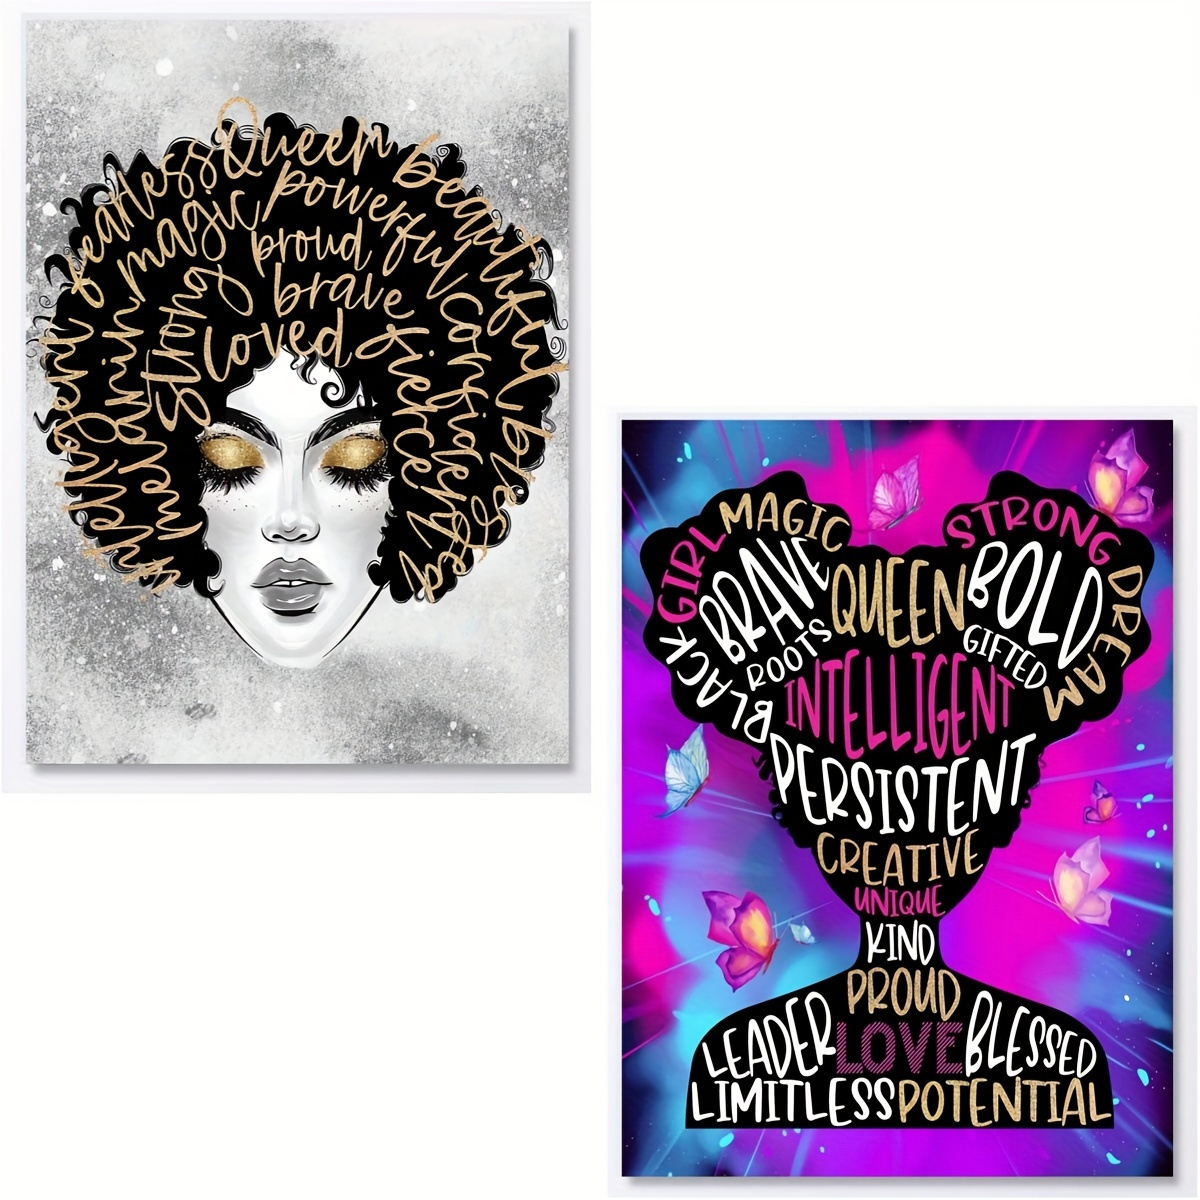 Brooke & Vine African American Black Woman Wall Decor Art Prints (UNFRAMED  8 x 10) Gift for Women Teen Girl Room Inspirational Posters - Home, Office